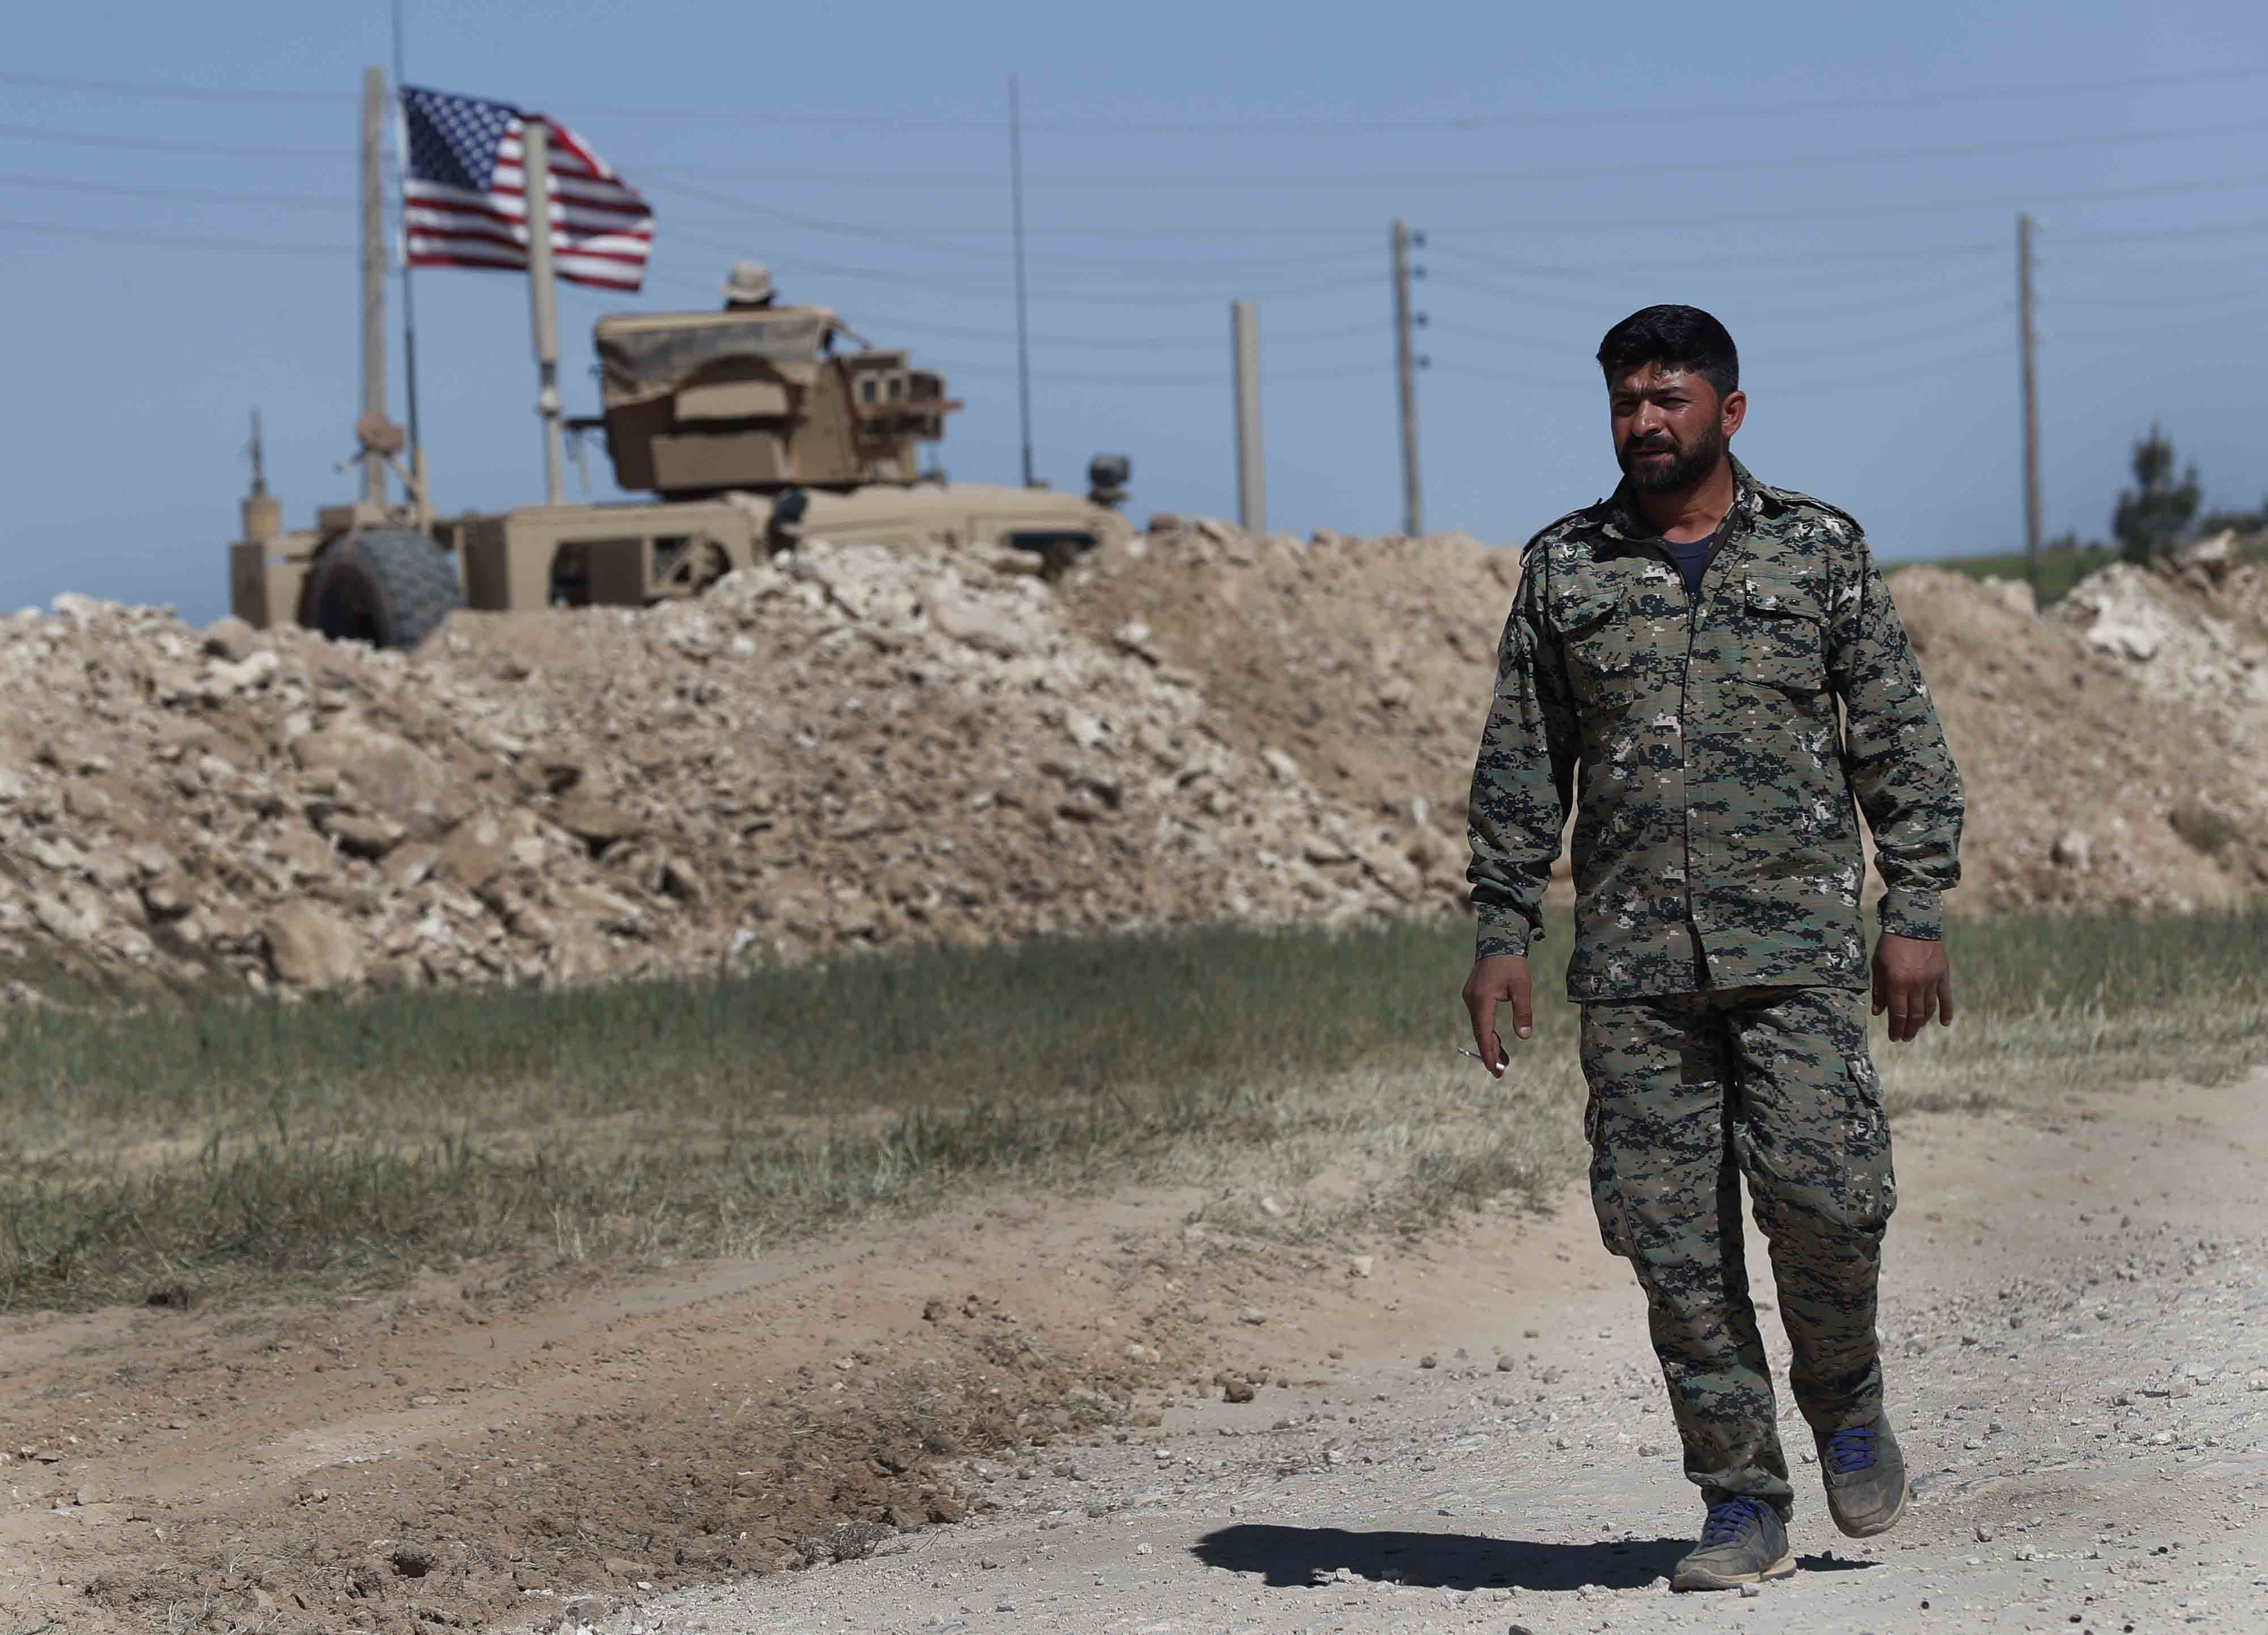 The YPG has worked closely with the United States in the fight against IS jihadists in Syria